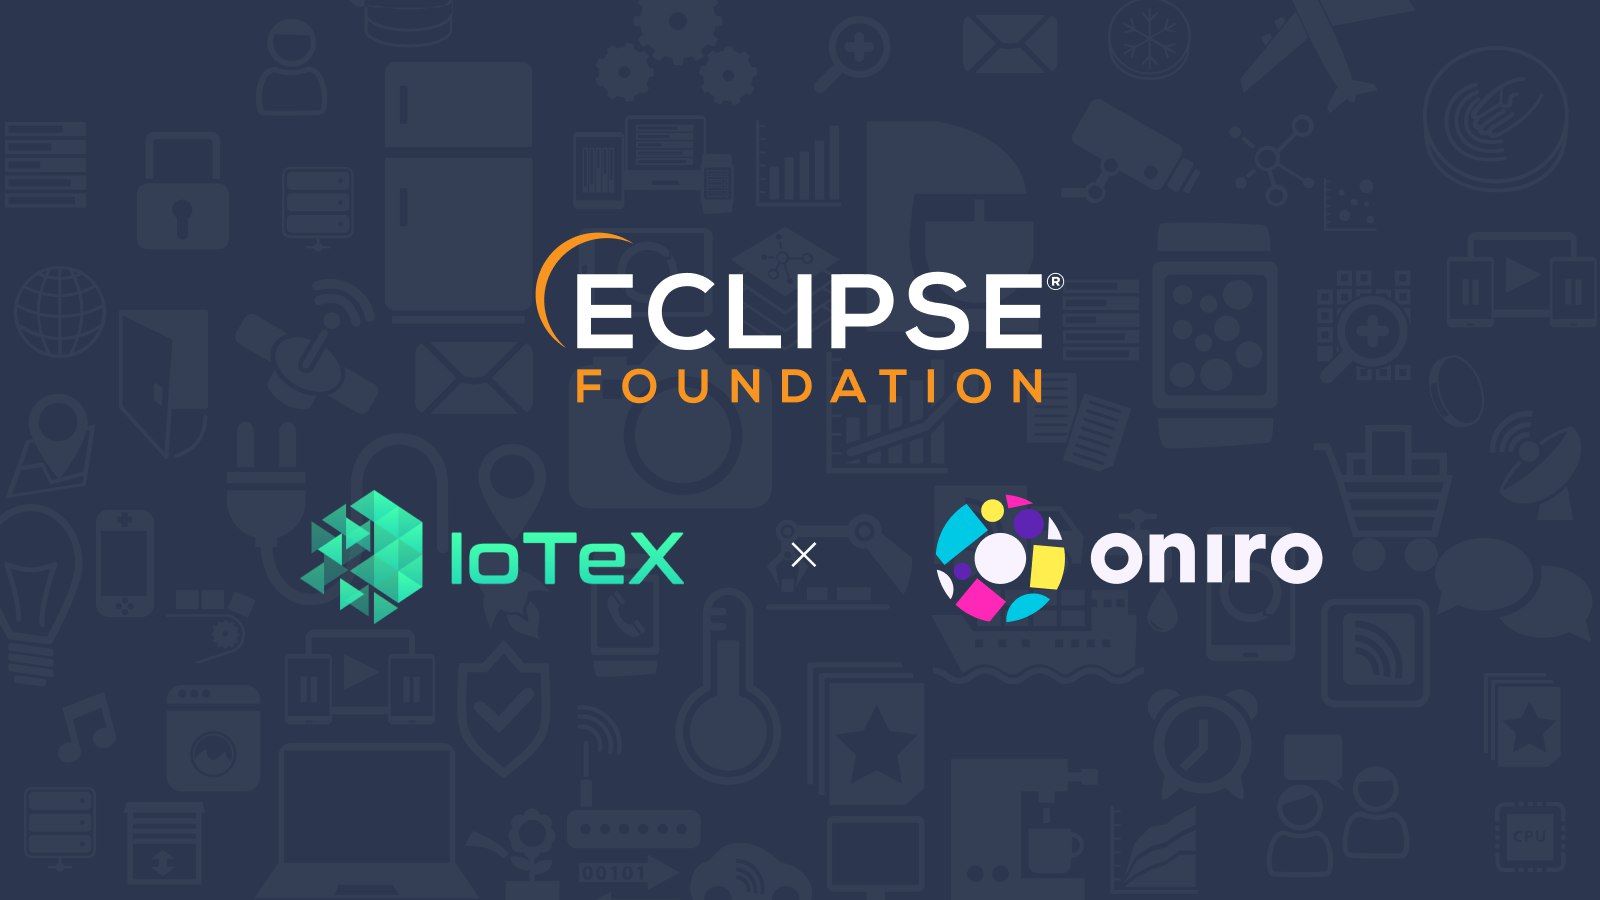 Why IoTeX is thrilled to join one of the world's largest open source software foundations